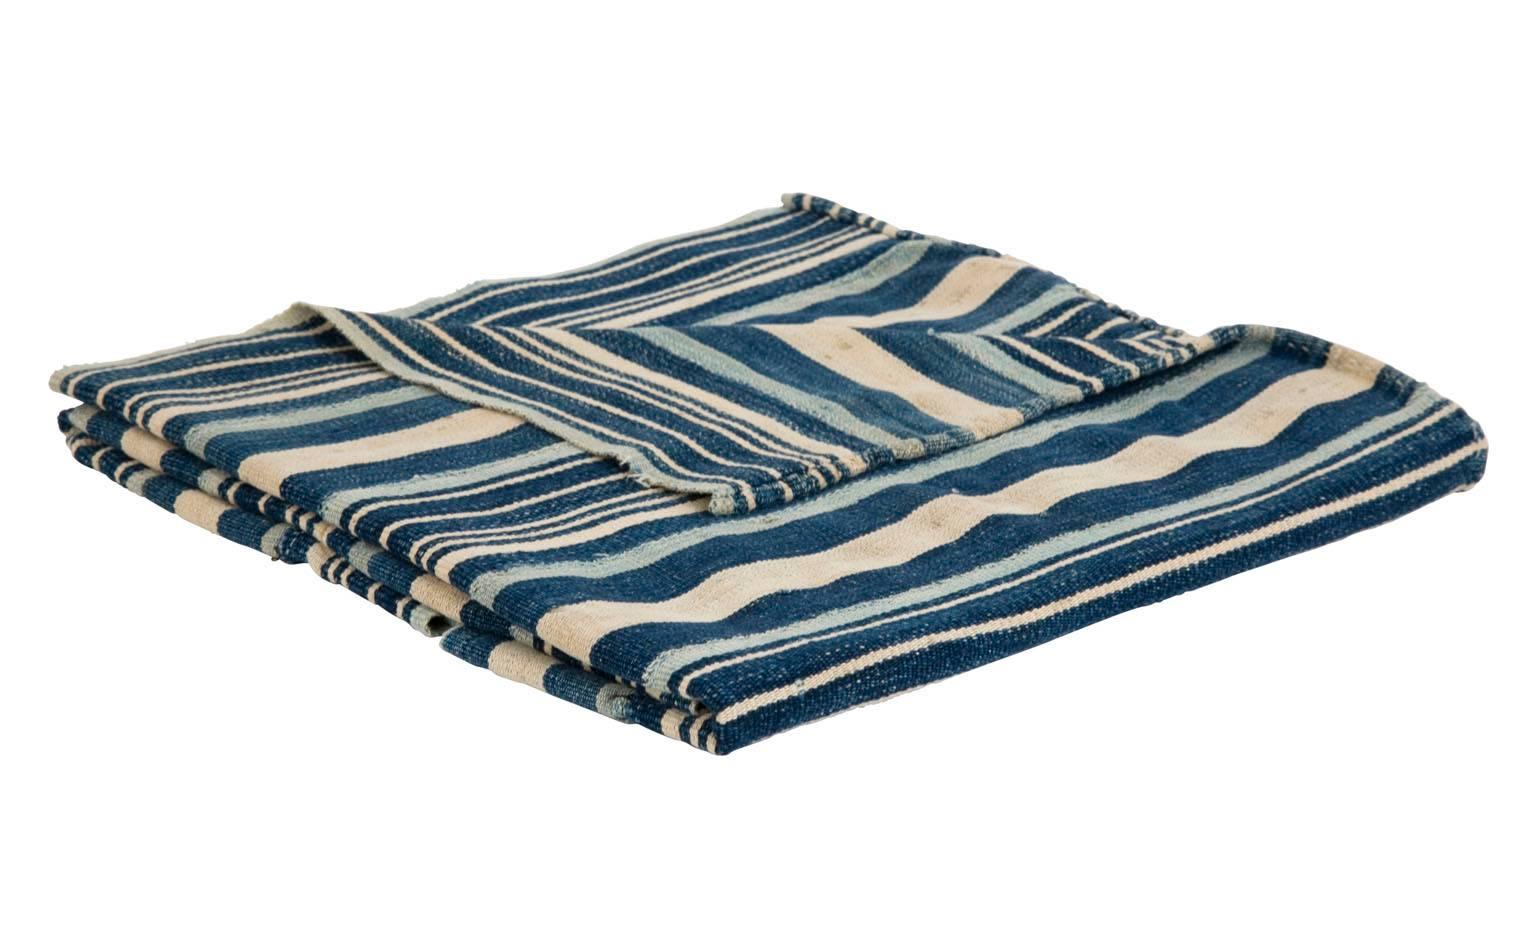 These vintage textiles originate from West Africa. The pieced fabric comes from what were then men's skirts yes, skirts from the 1940s. The textiles are hand dyed, hand woven, and hand-sewn together. 

Approximately 40 x 60
Vintage
Hand dyed indigo